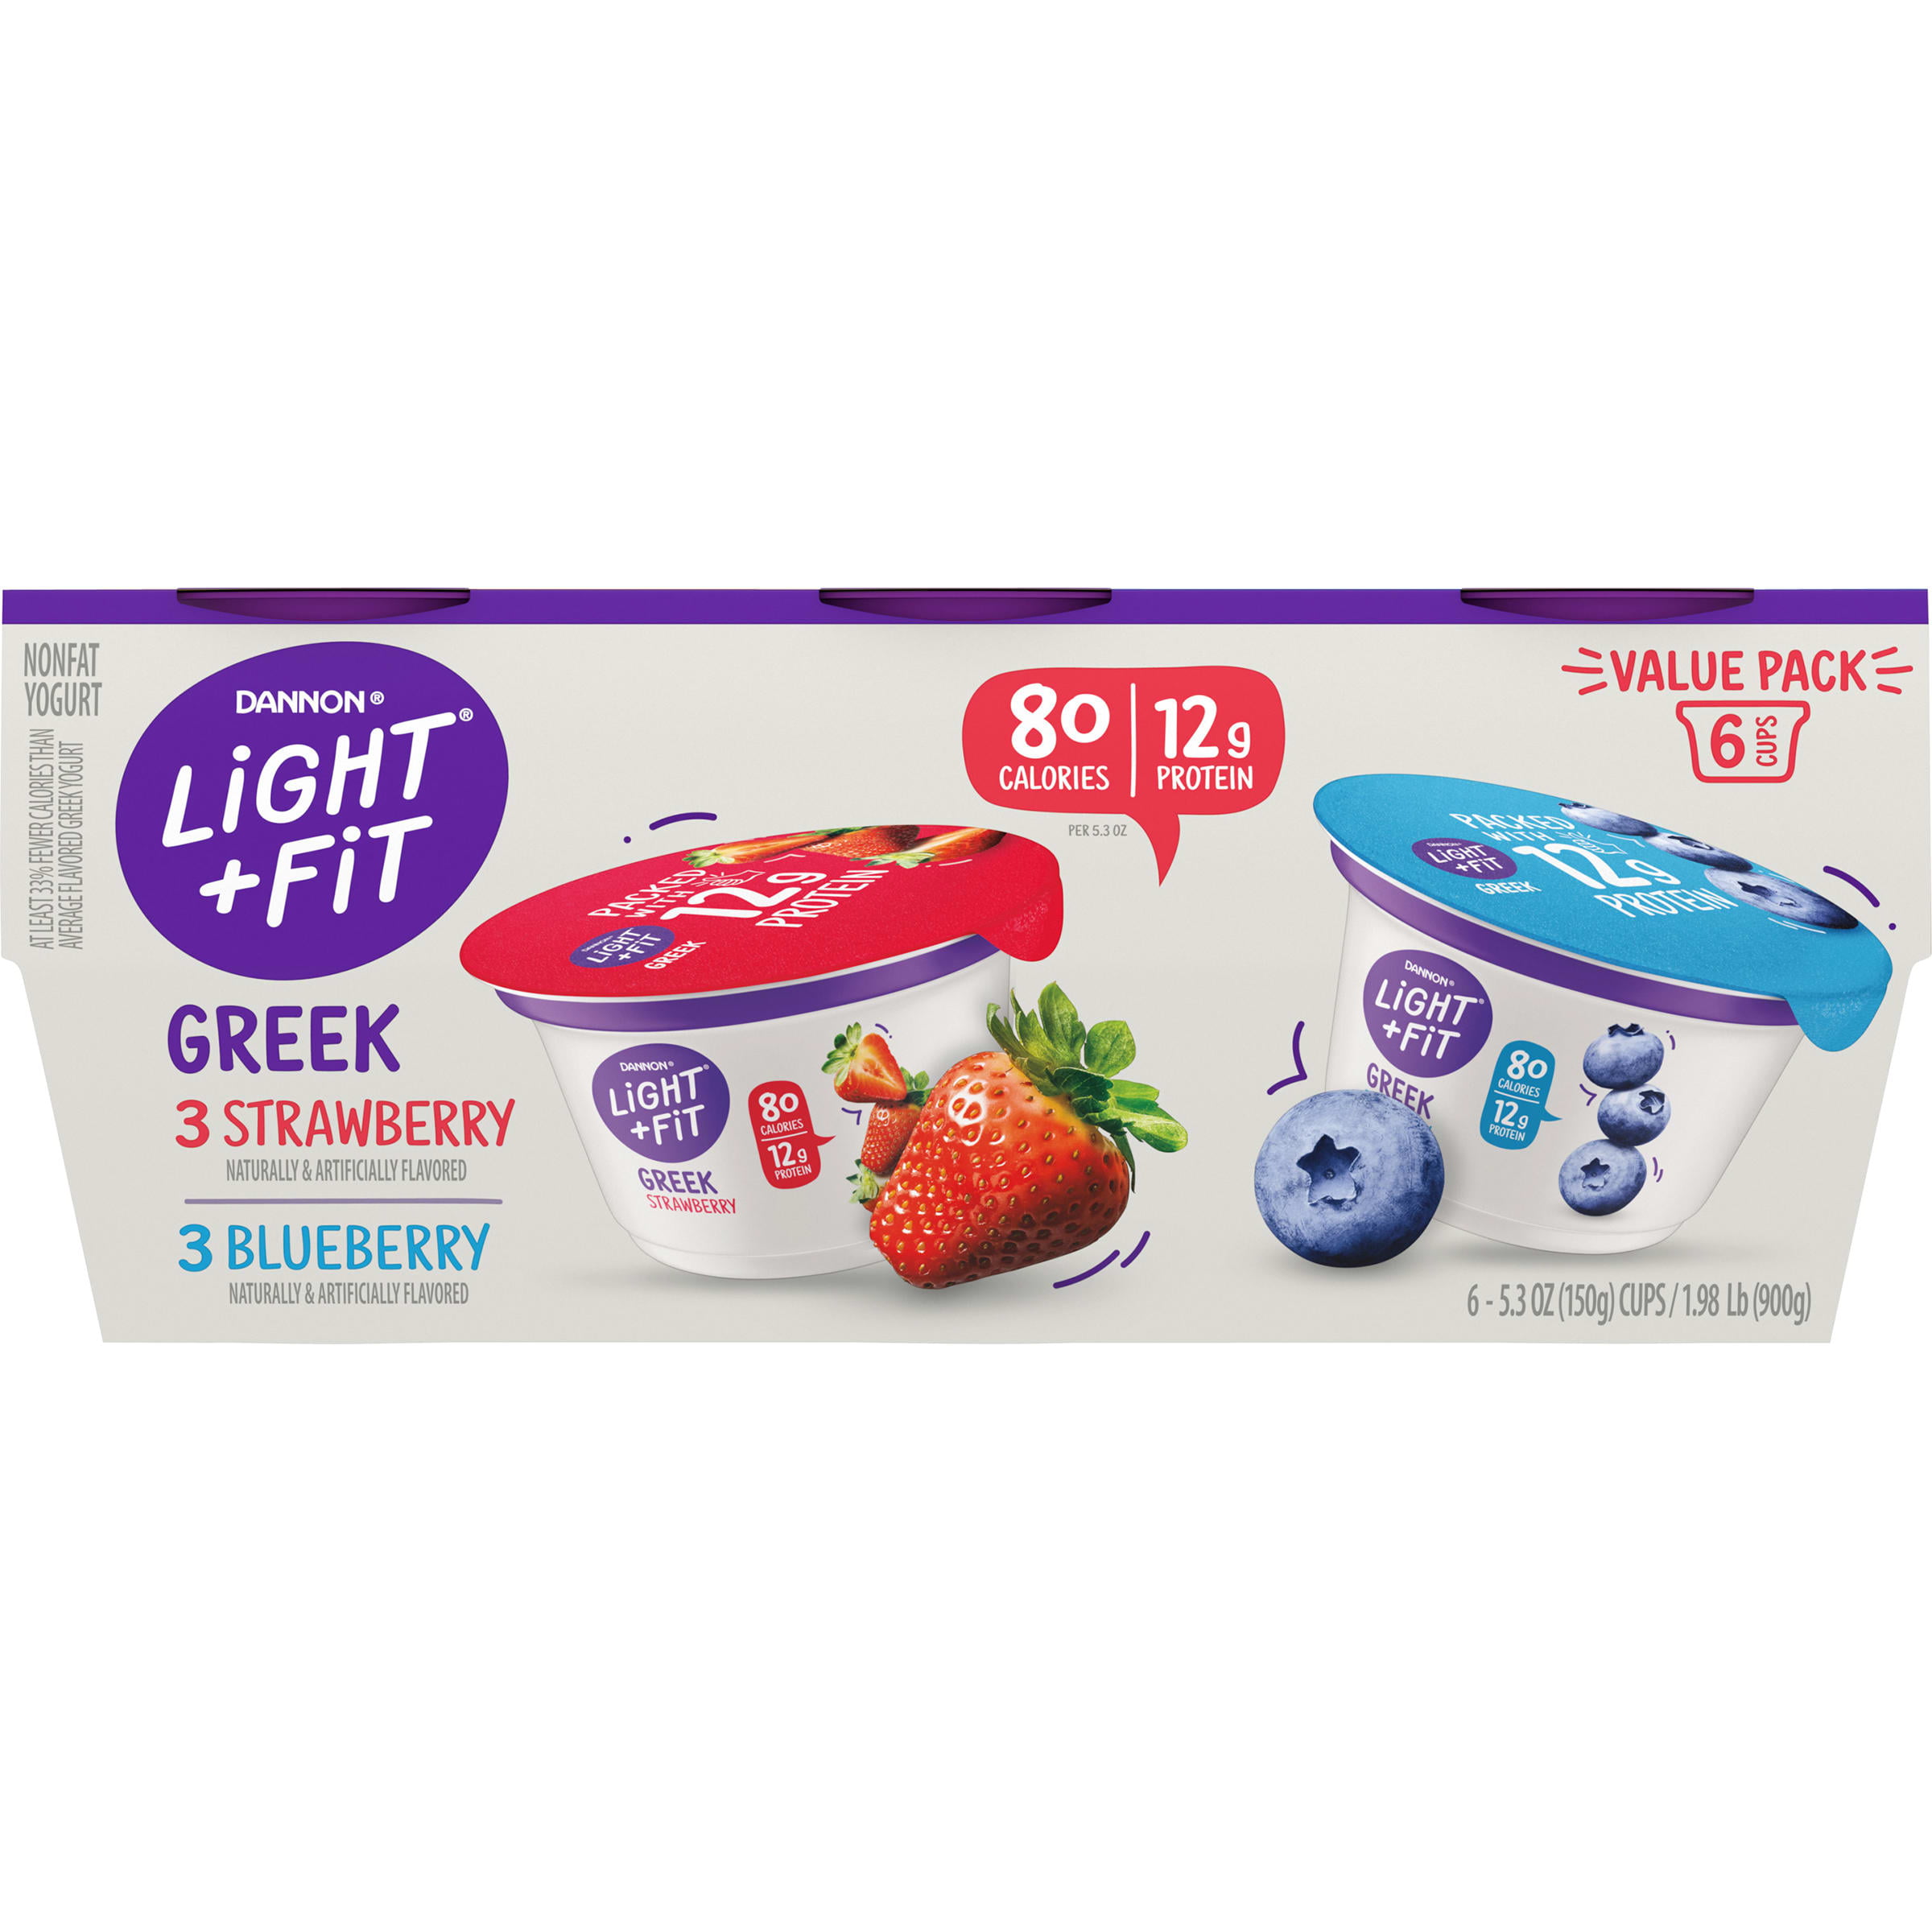 Light + Fit Strawberry/Blueberry Variety Pack Greek Yogurt, 5.3 Oz. Cups, 6 Count